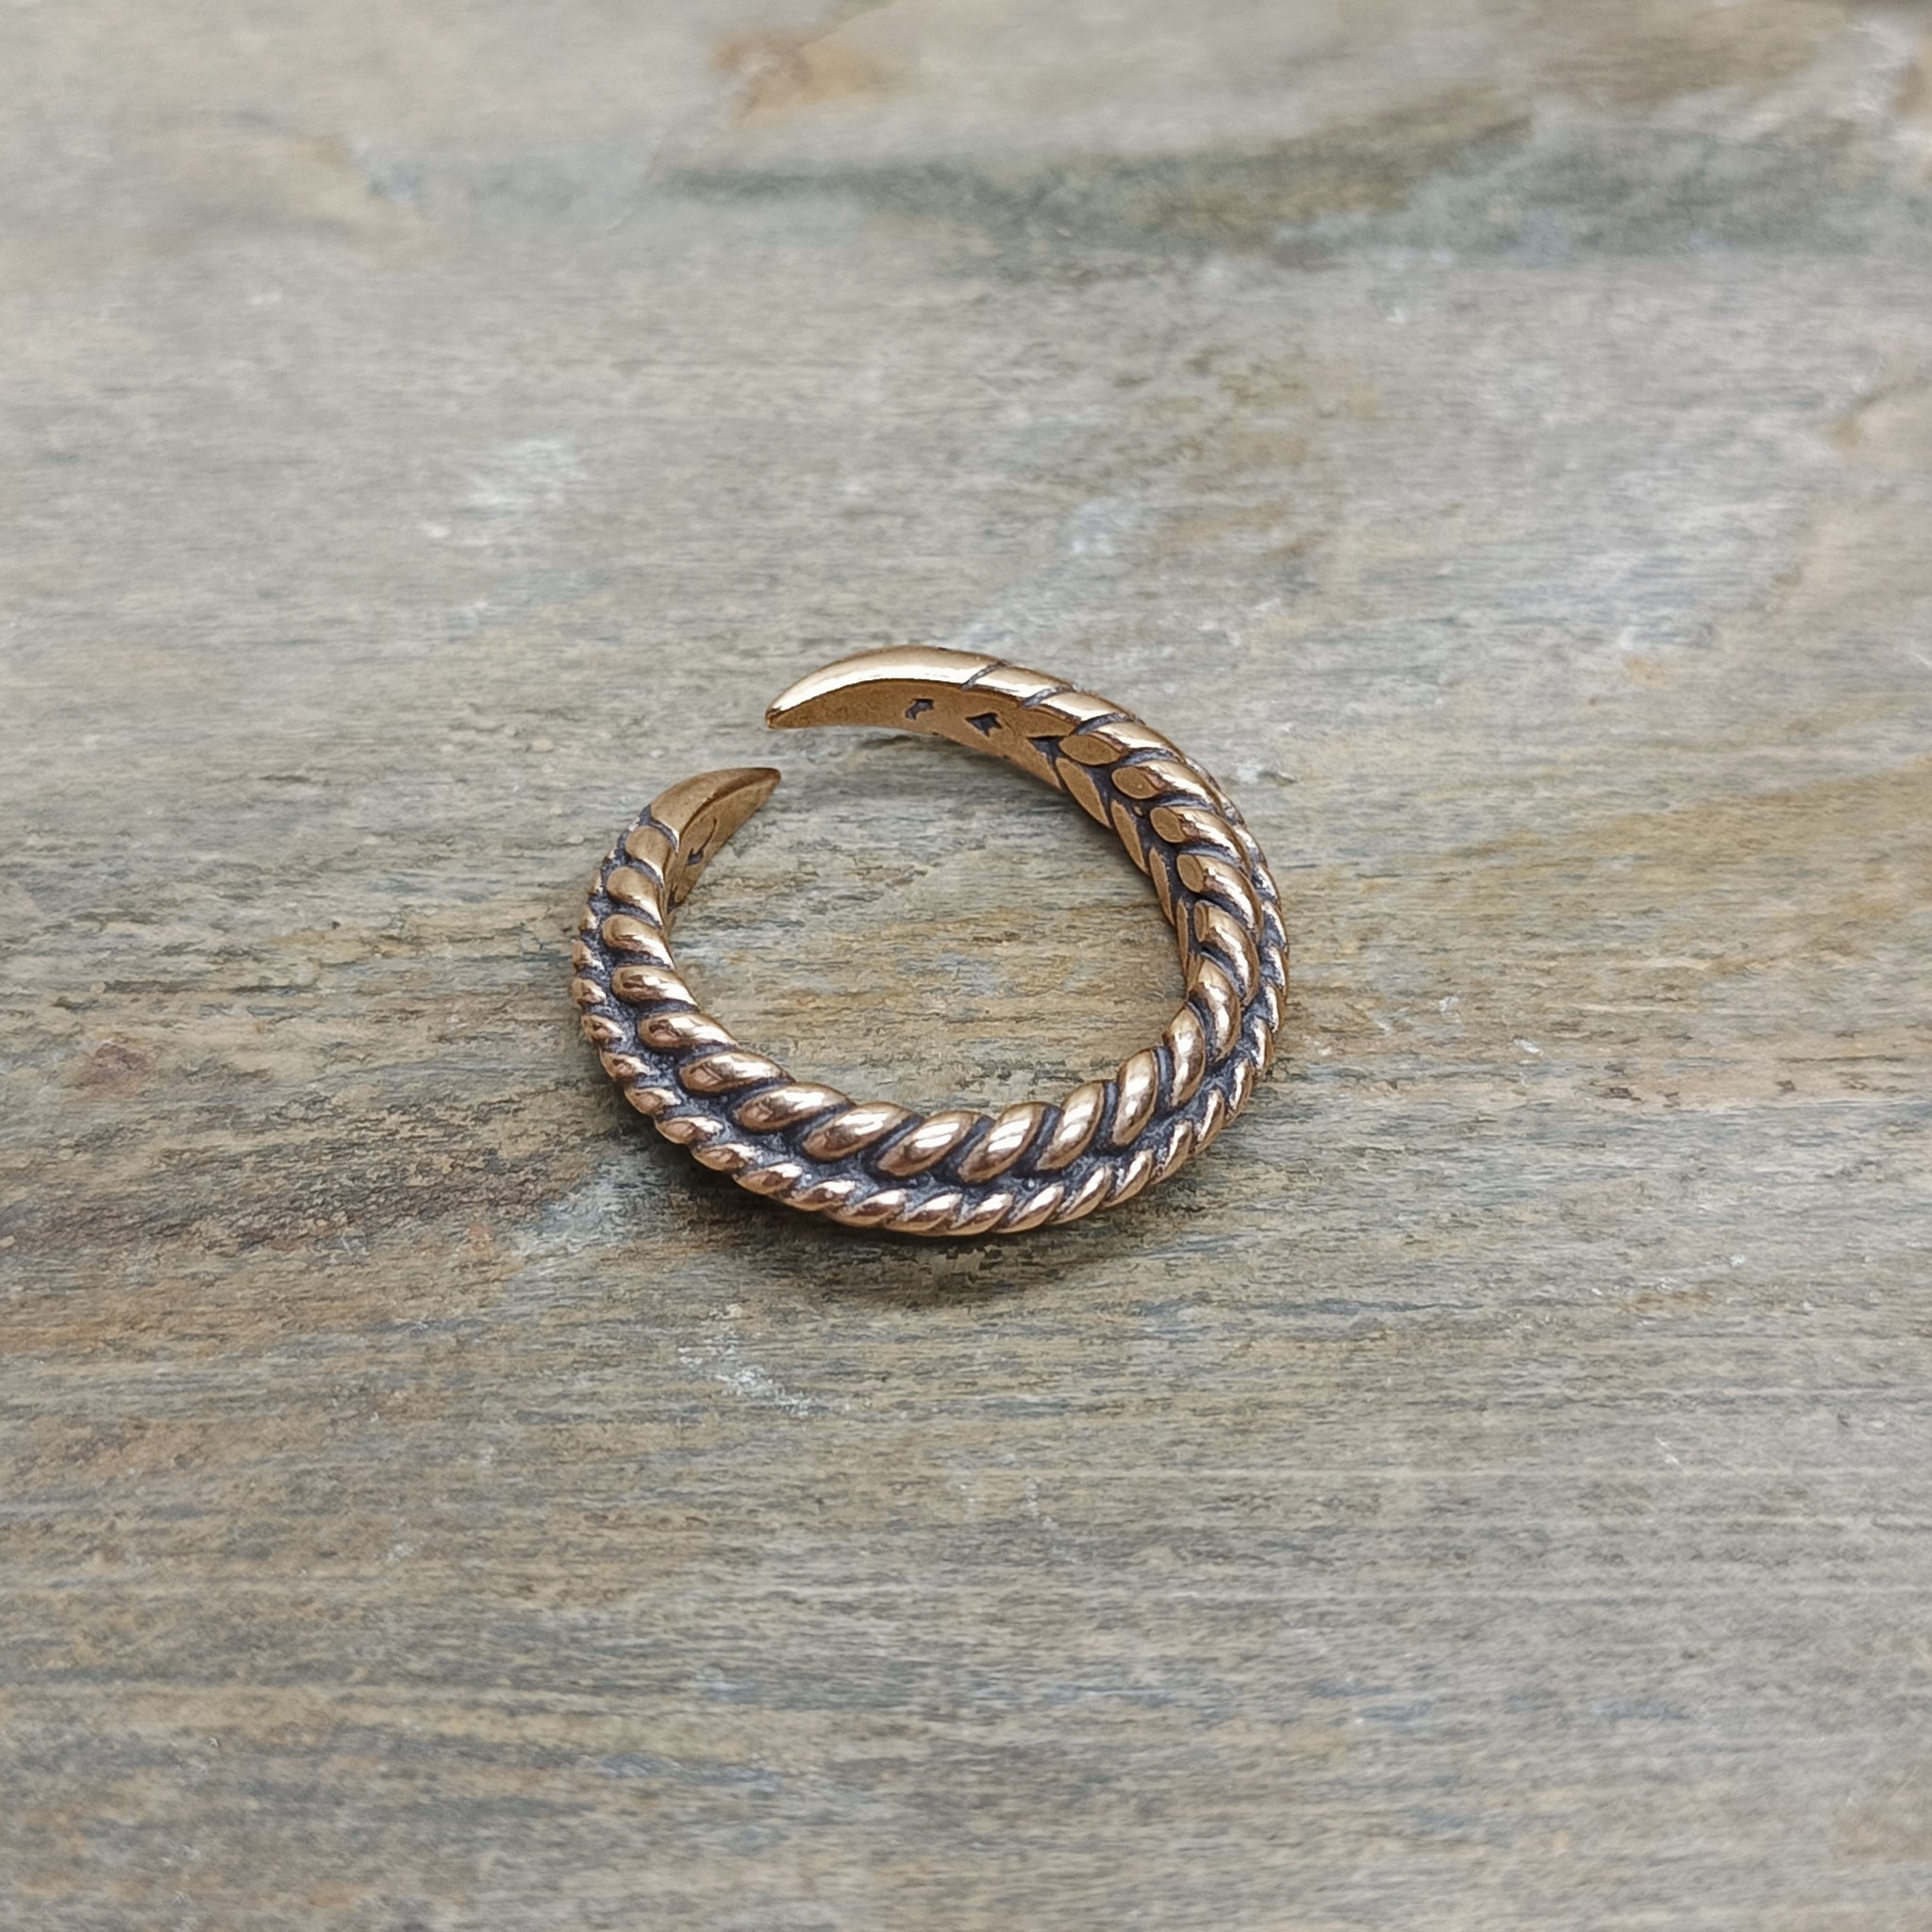 Bronze Braided Viking Ring on Stone - Front Angle View